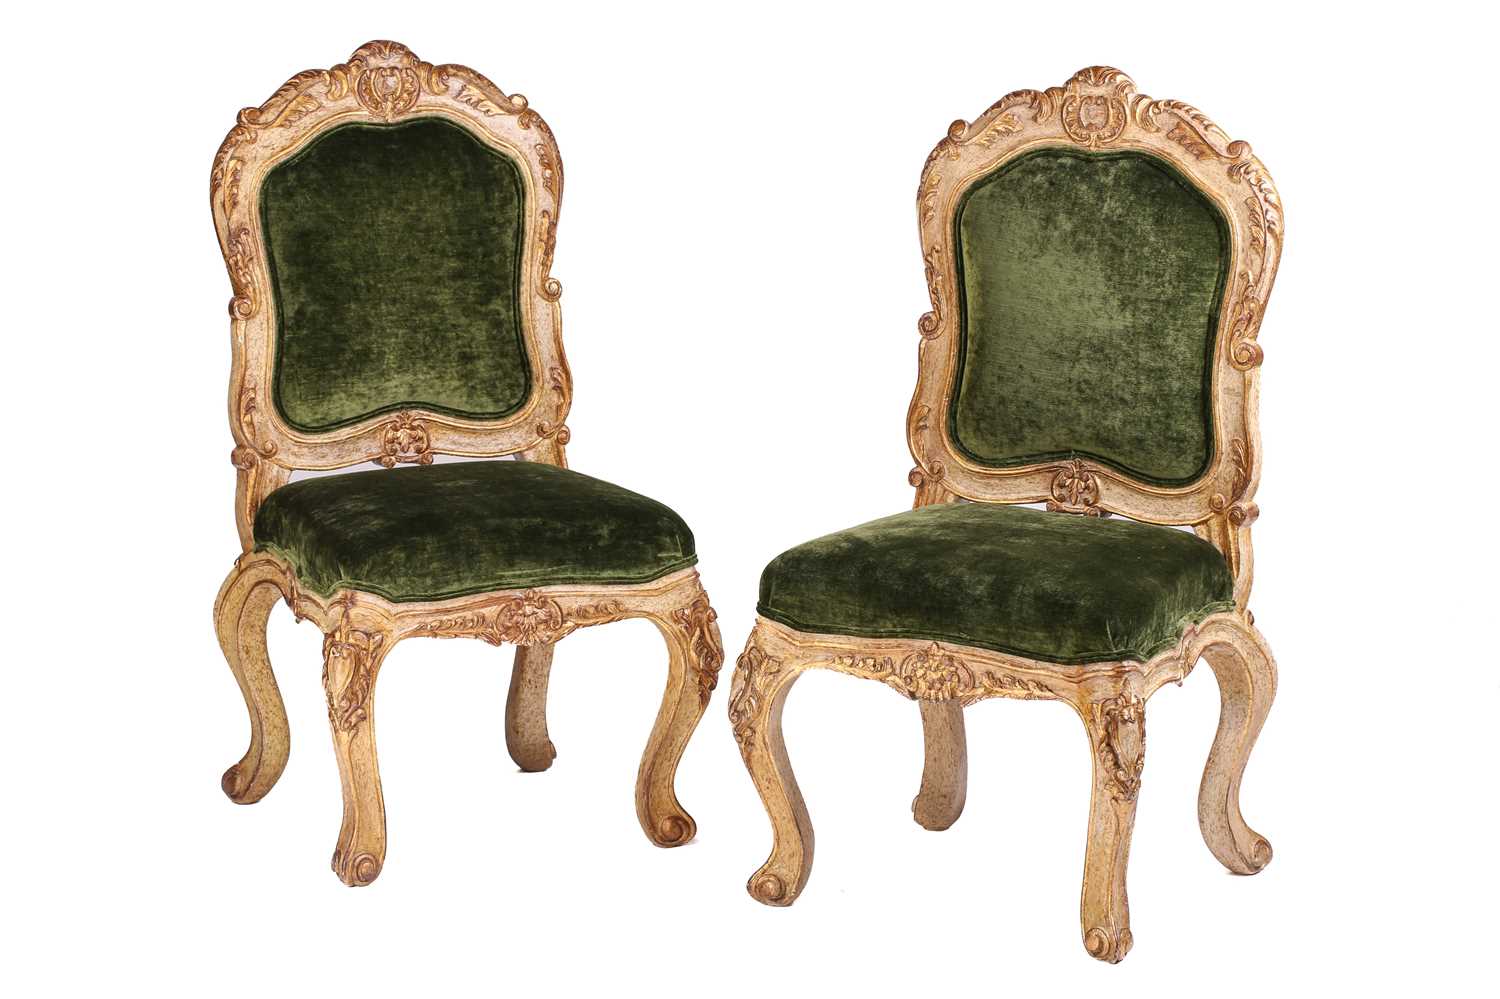 A set of large Mexican French-style painted and giltwood side chairs, 20th century with stuff over - Image 4 of 9